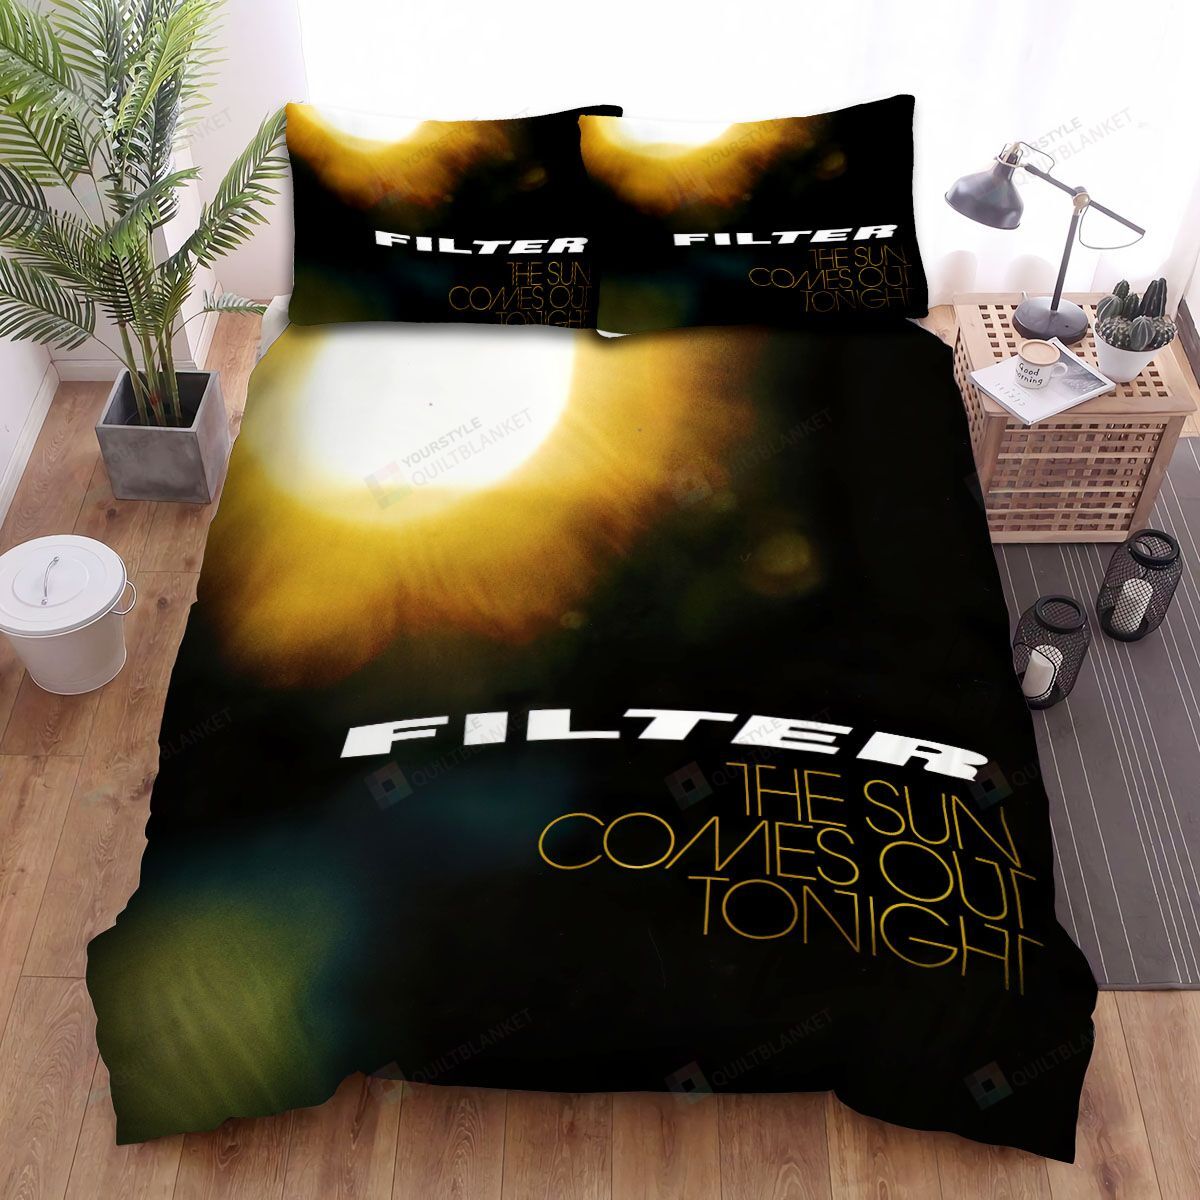 Music, Filter Band, The Sun Come Out To Night Bed Sheets Spread Duvet Cover Bedding Sets